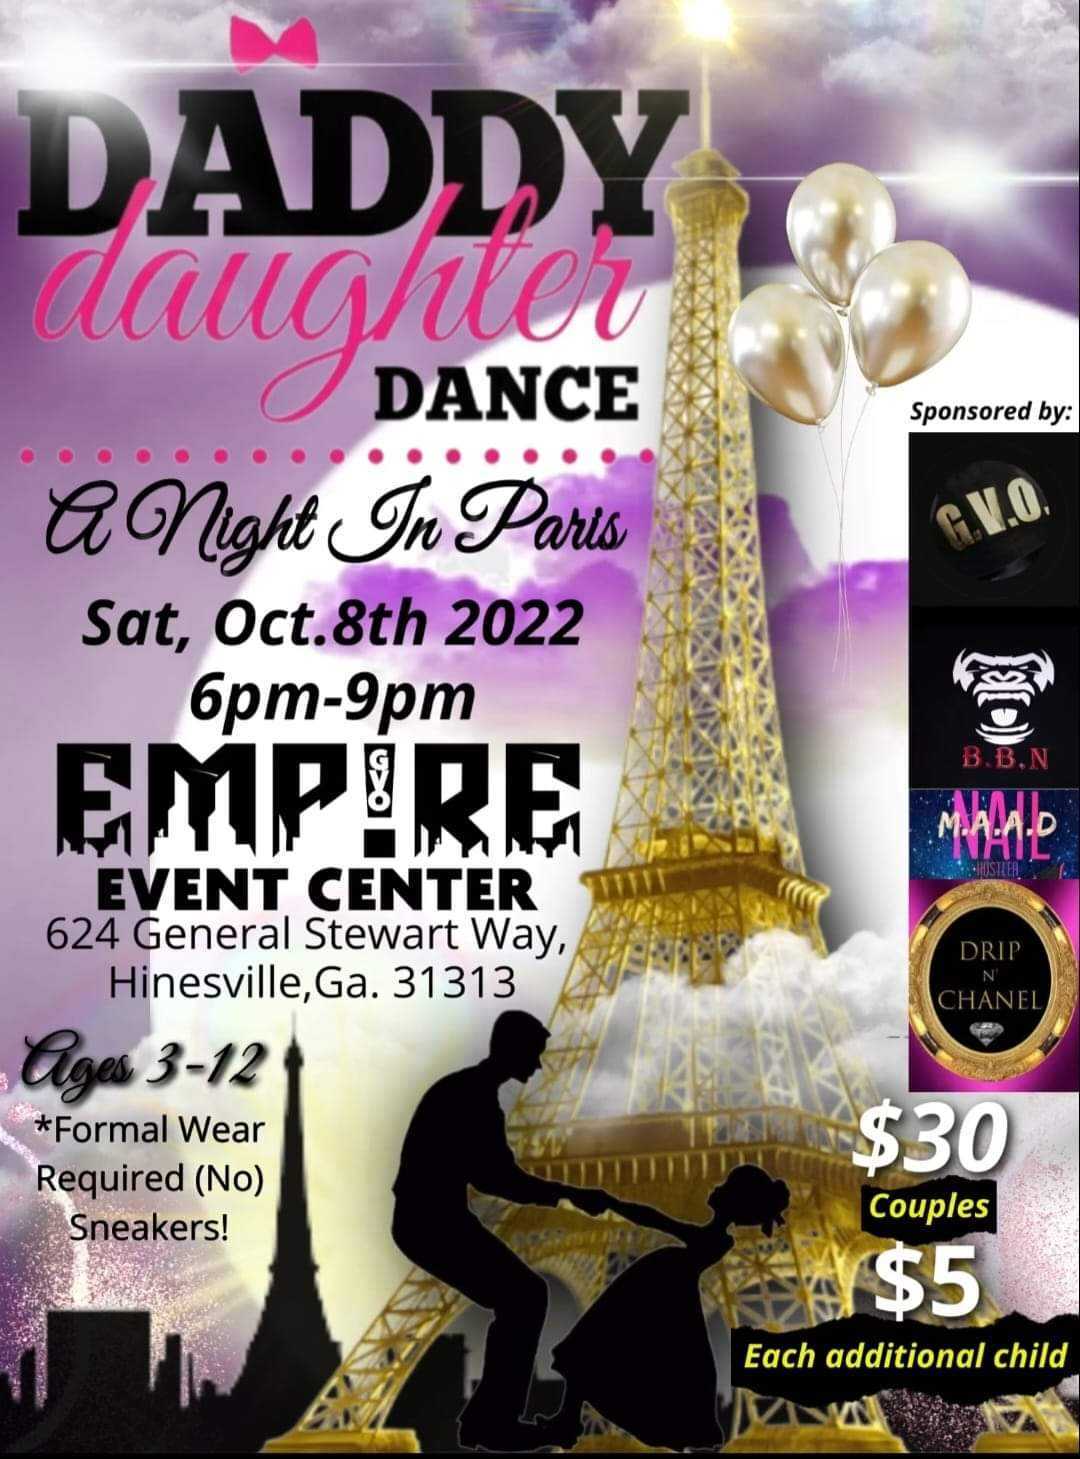 Flyer for Empire Event Center's Daddy Daughter dance